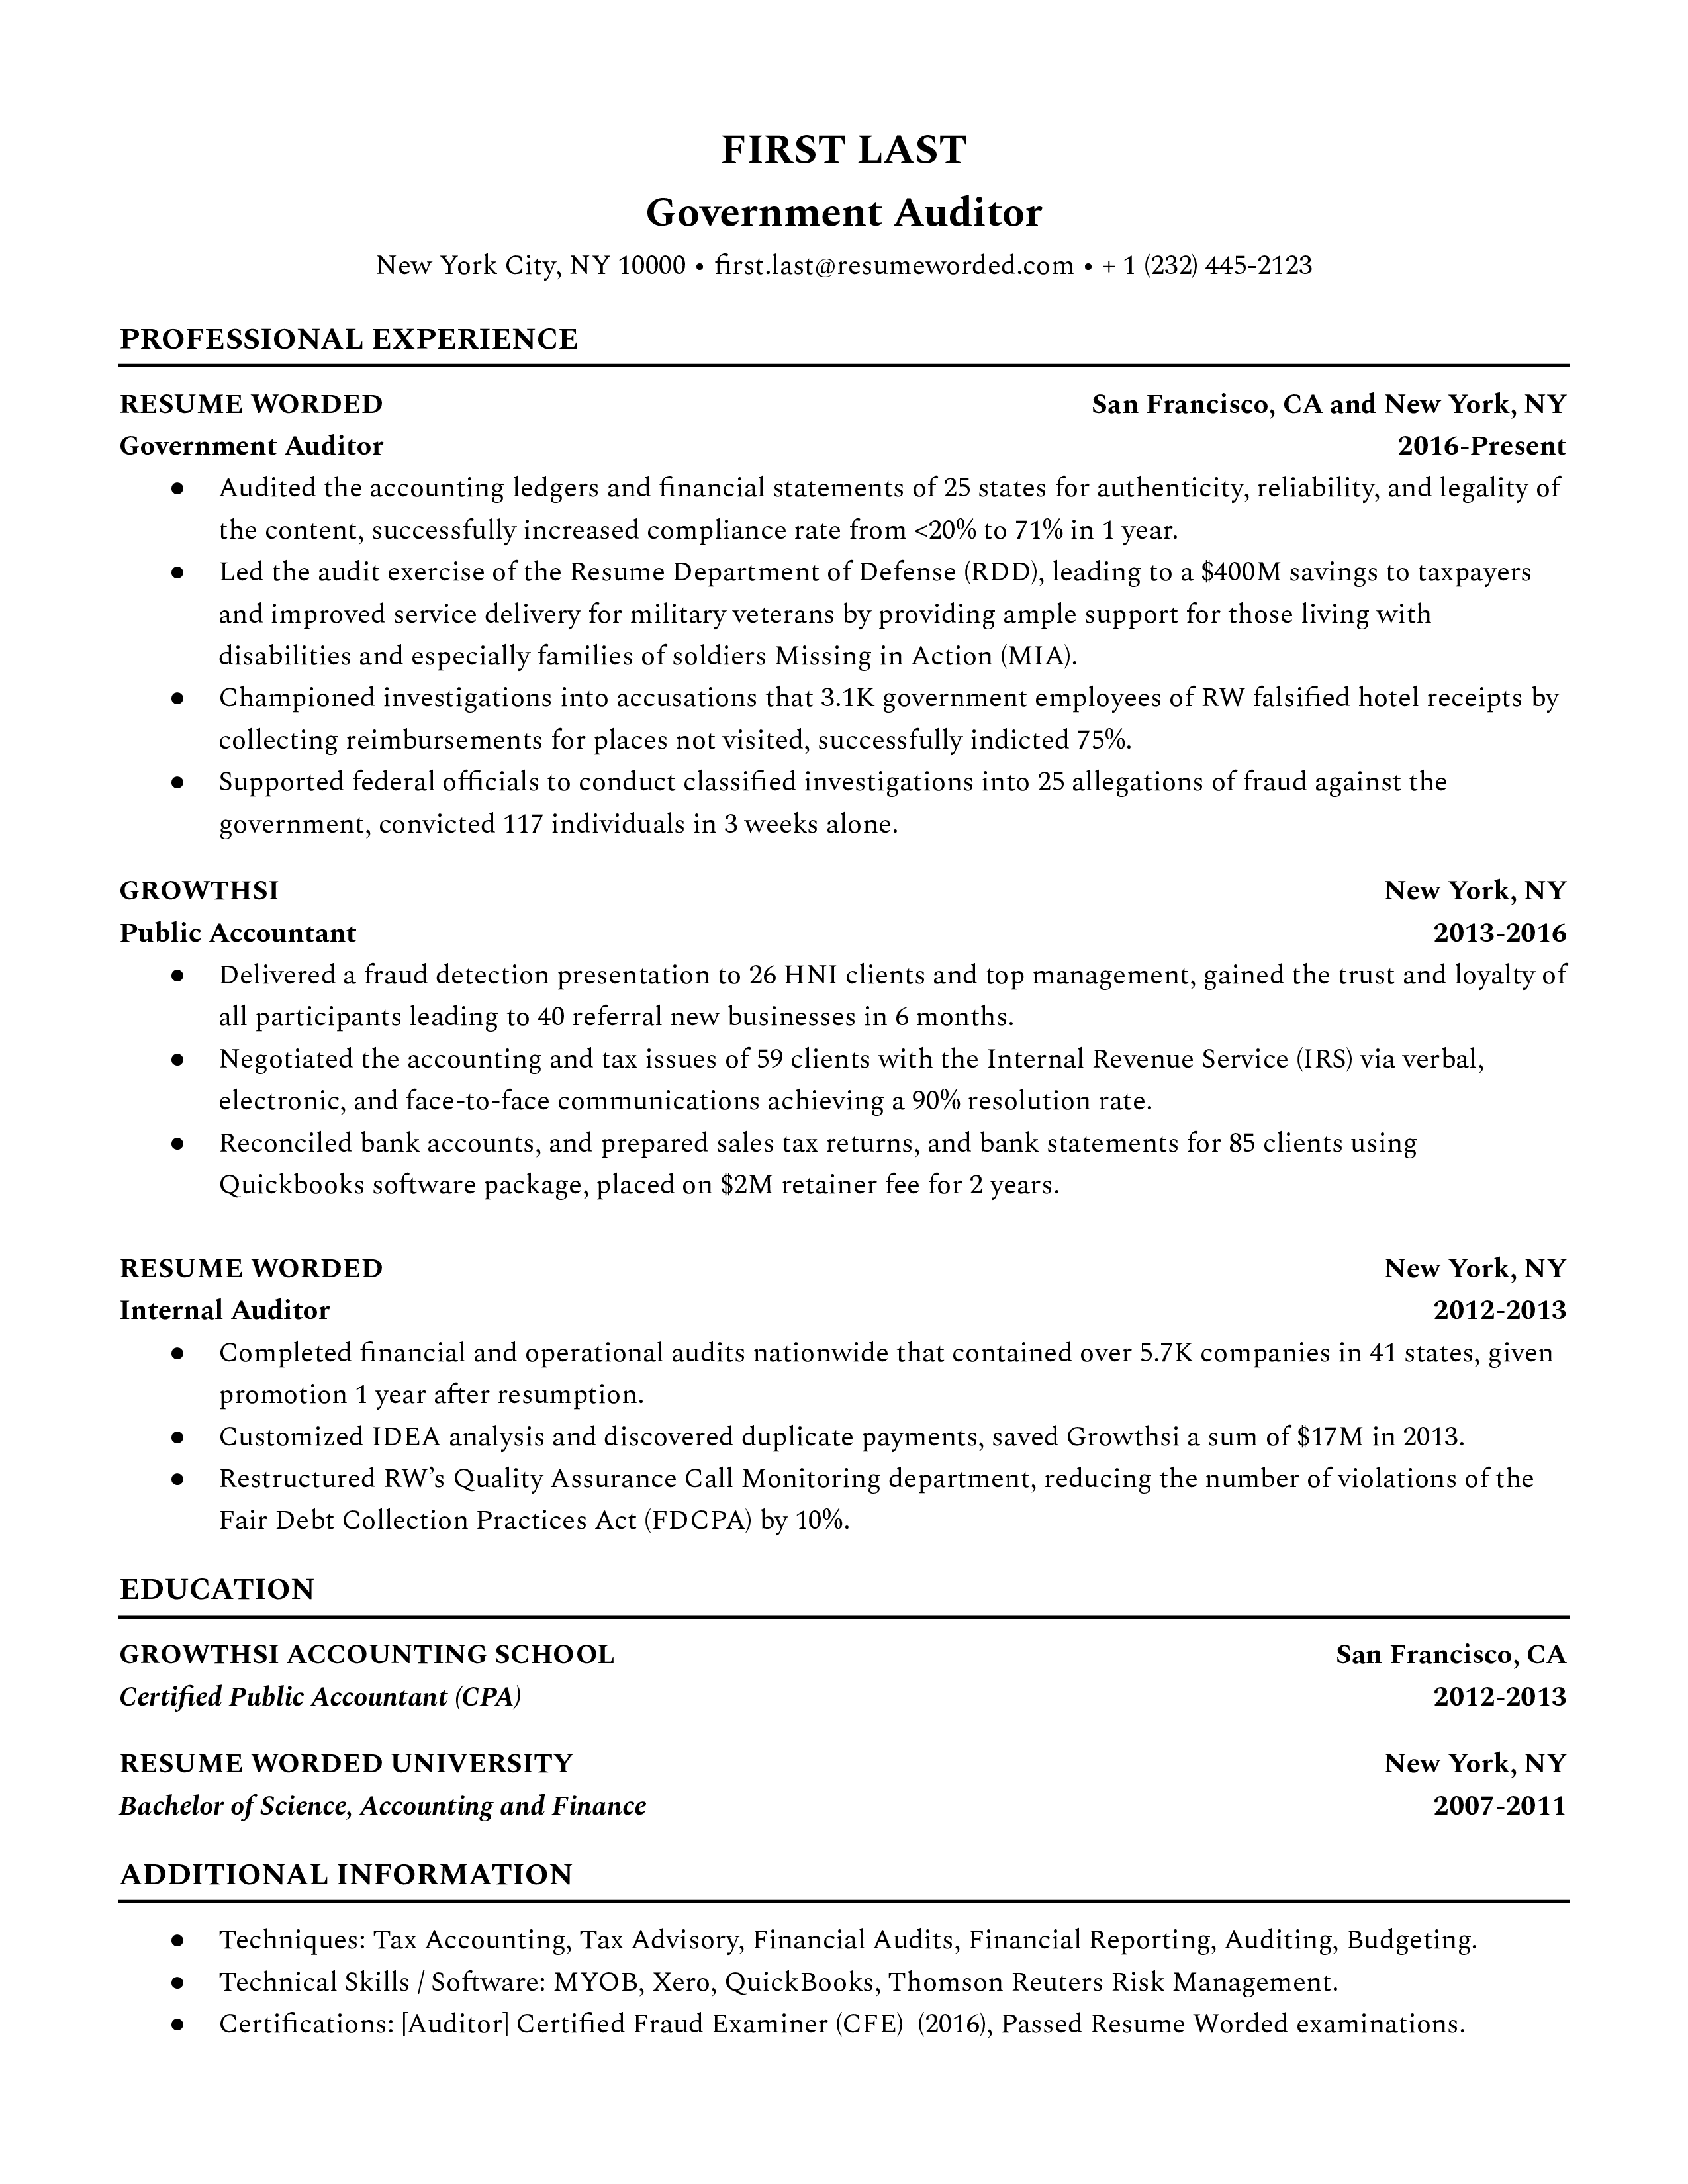 Government Auditor Resume Sample